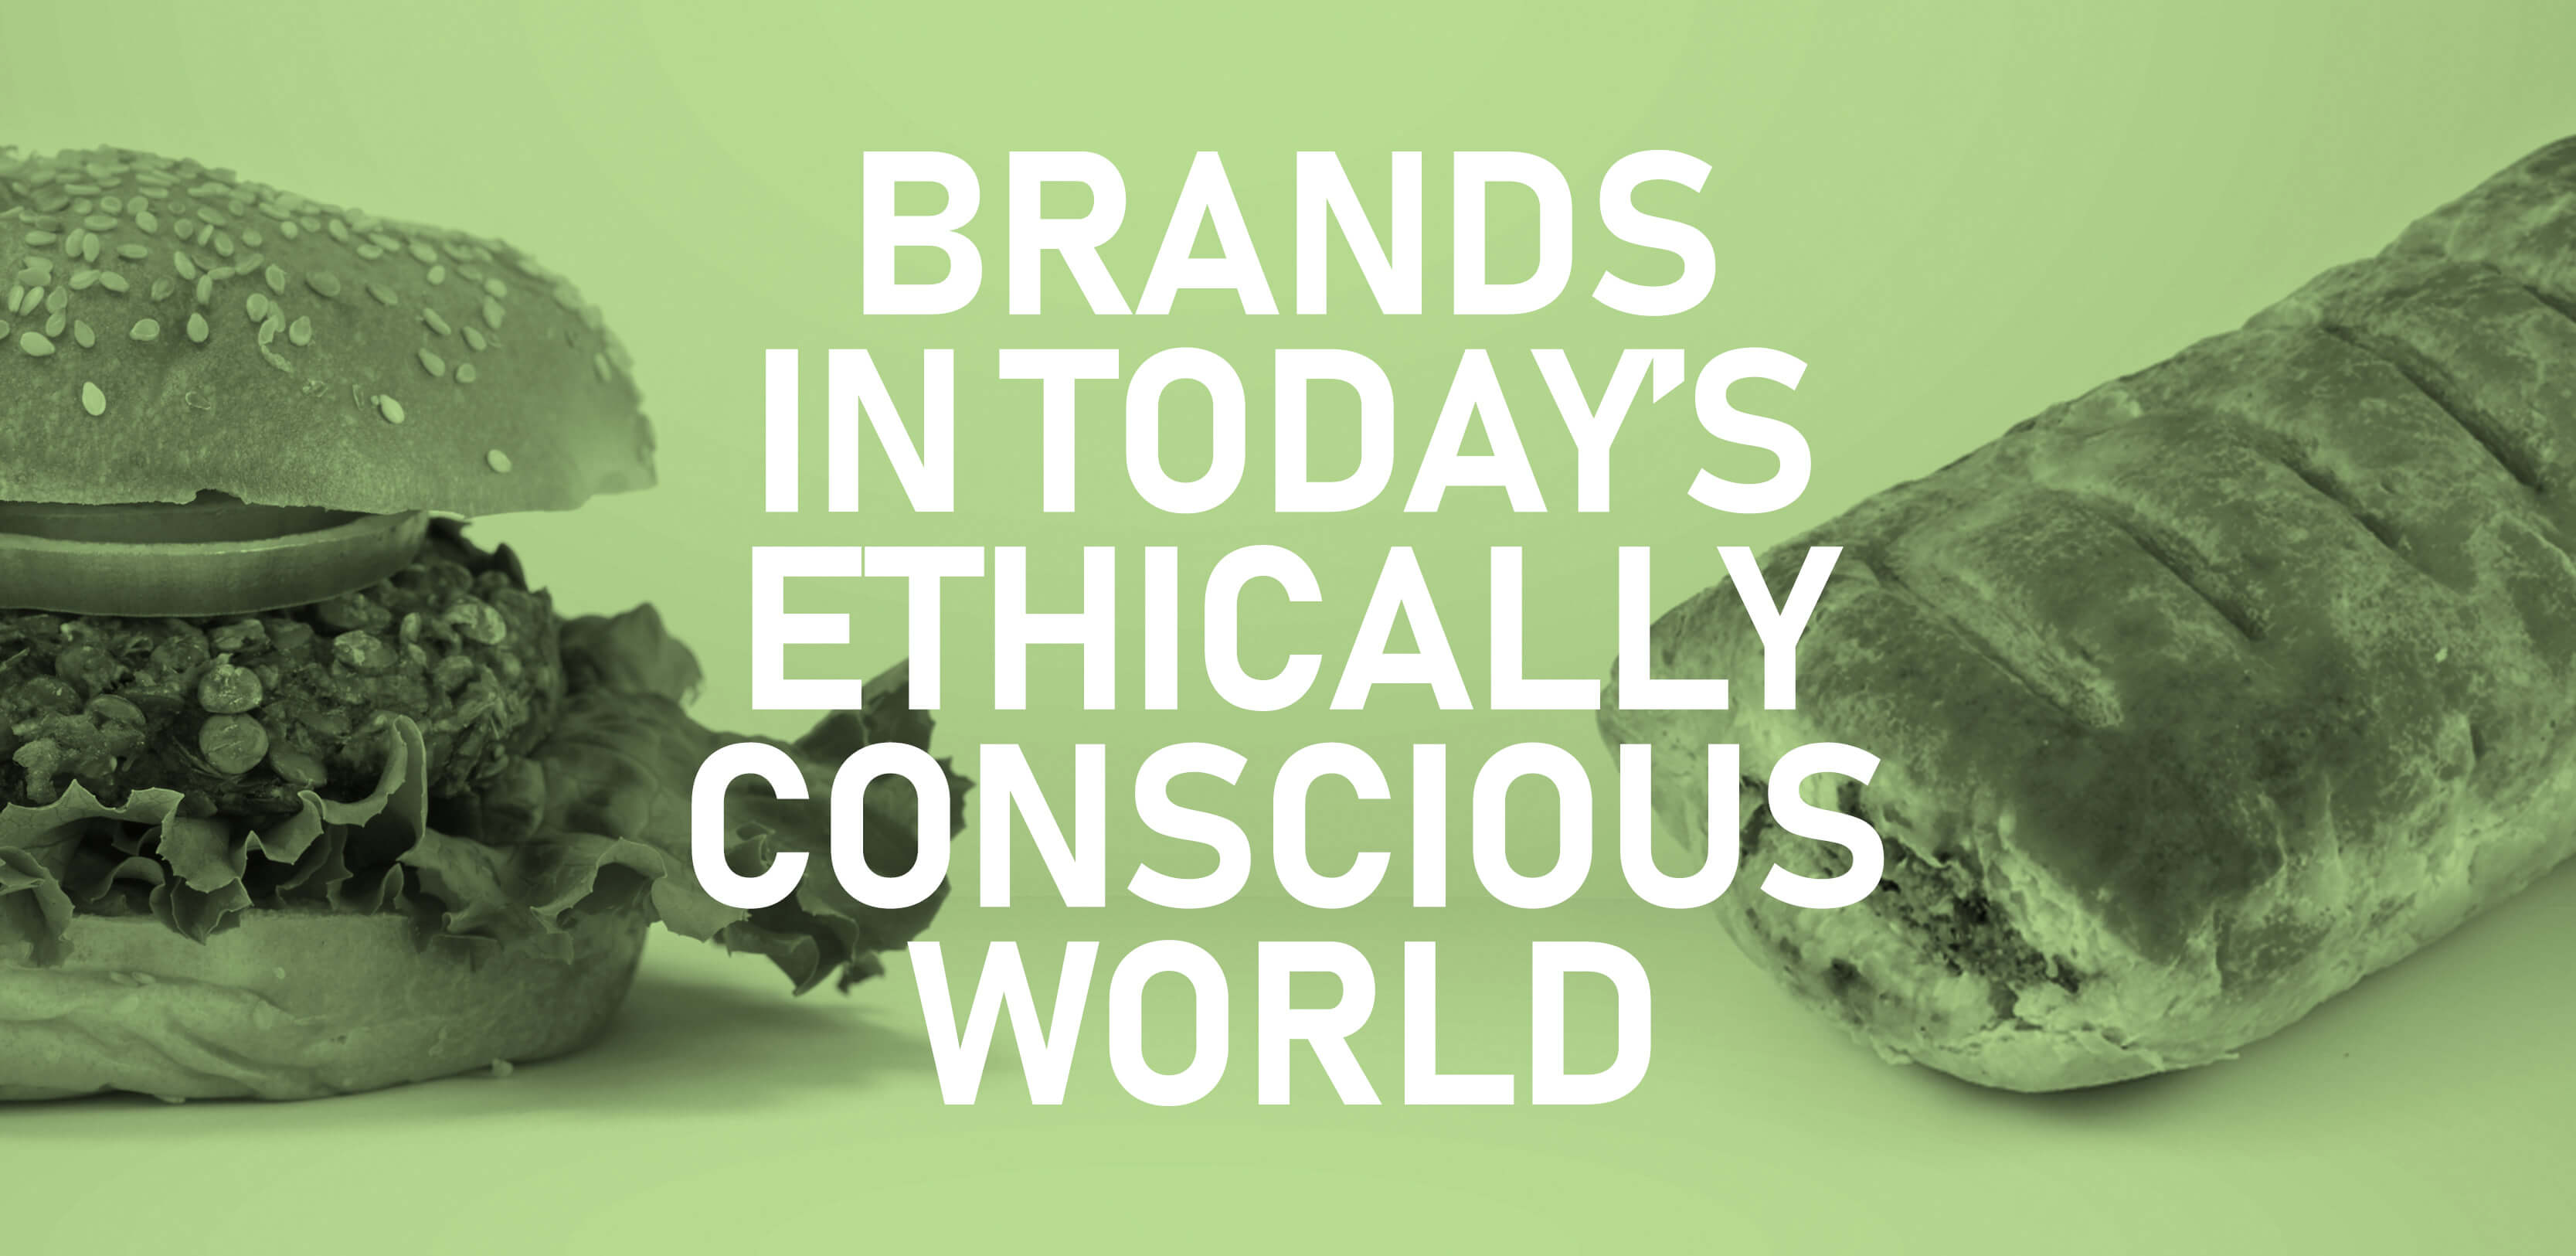 Brands in Today’s Ethically Conscious World 